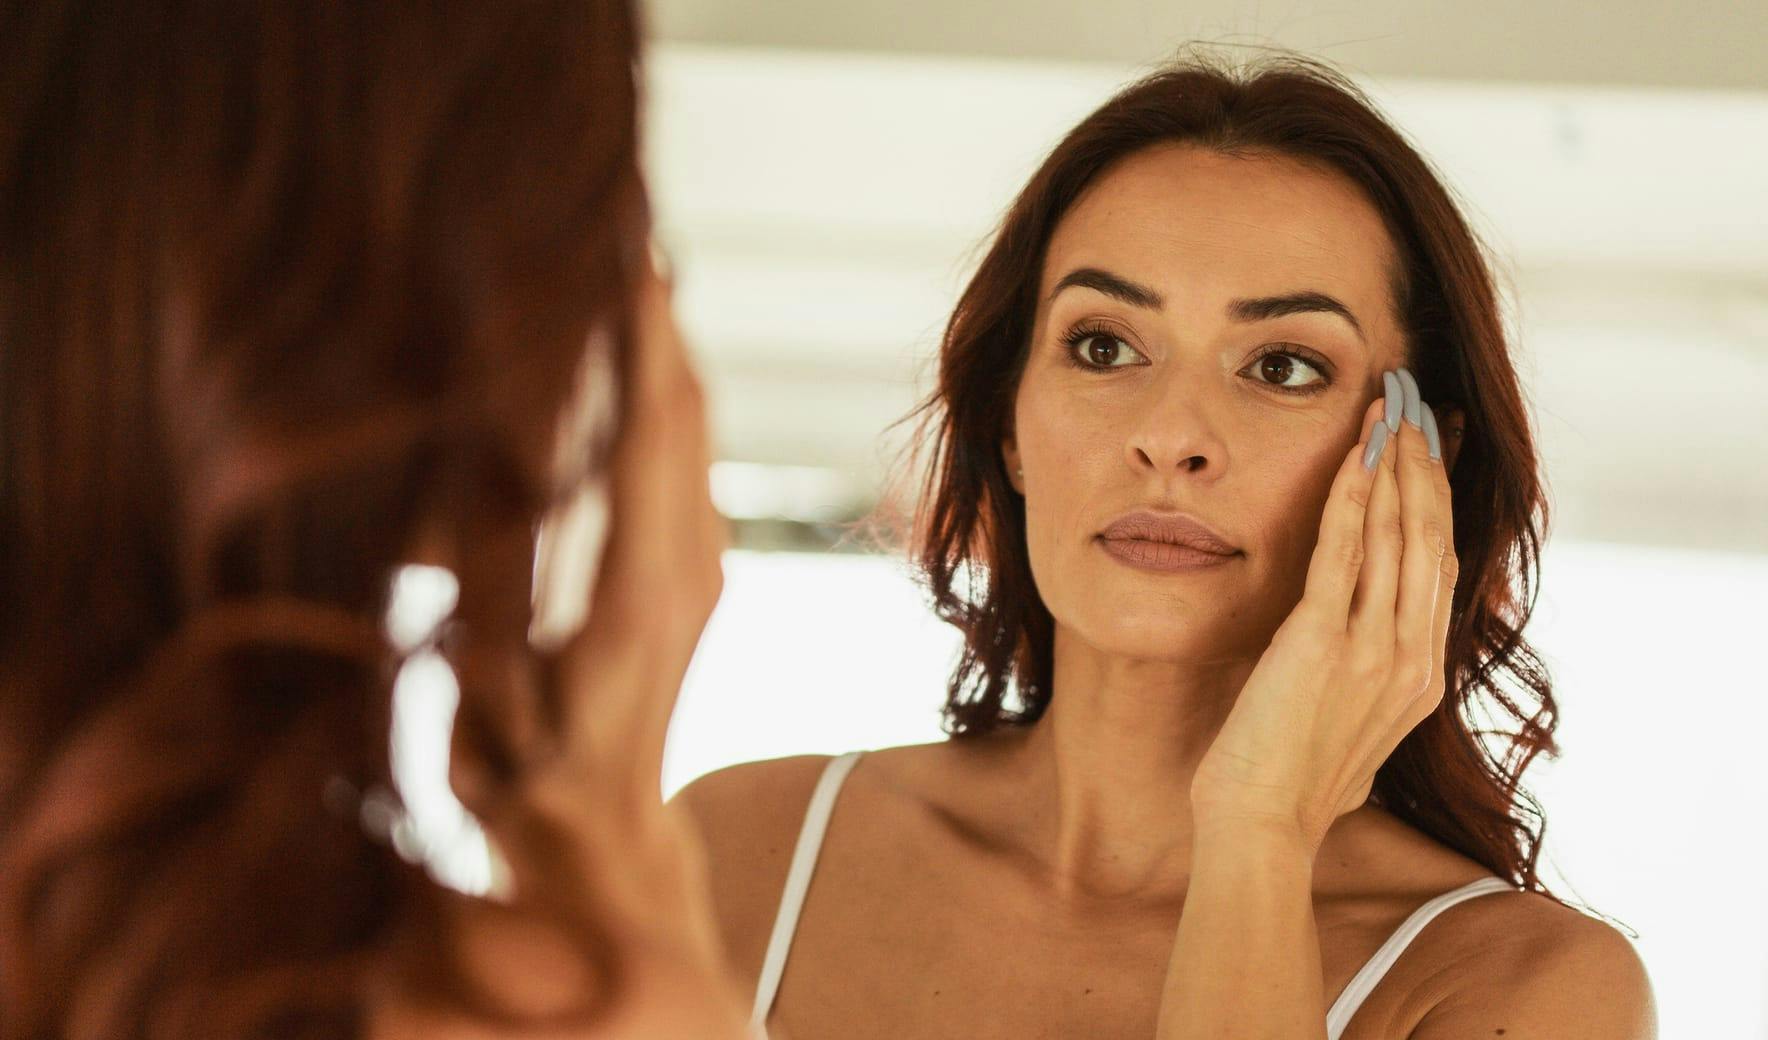 woman looking in mirror touching her face